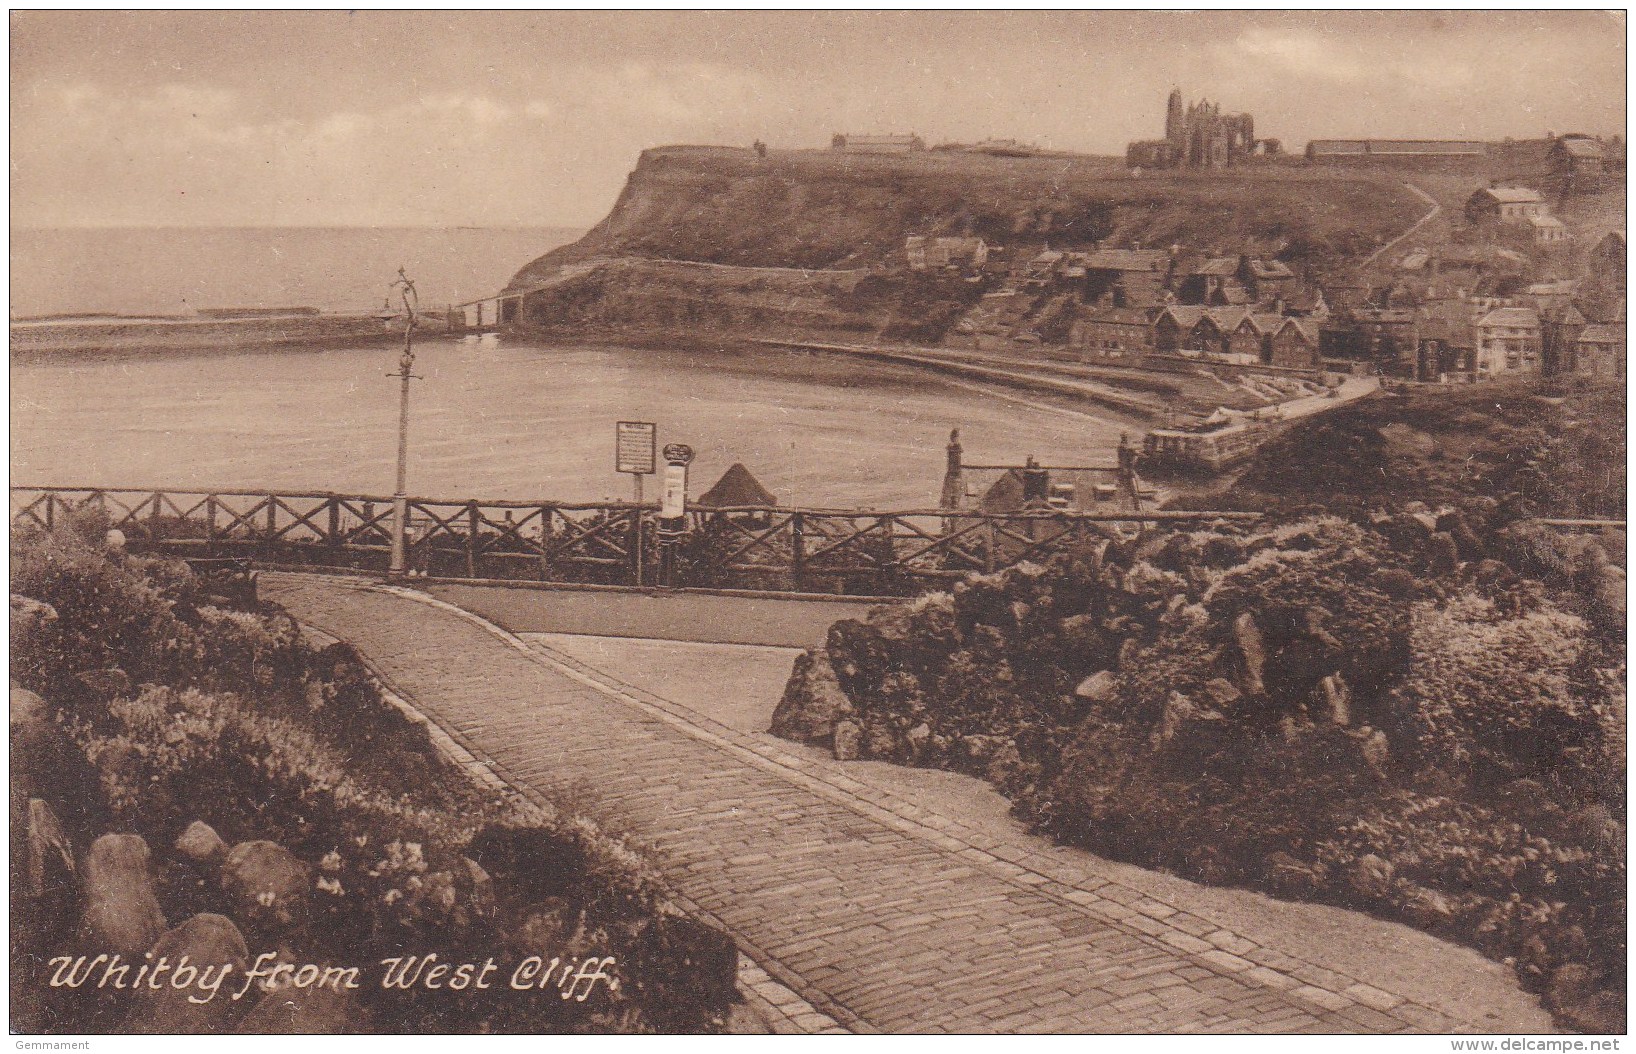 WHITBY FROM WEST CLIFF - Whitby